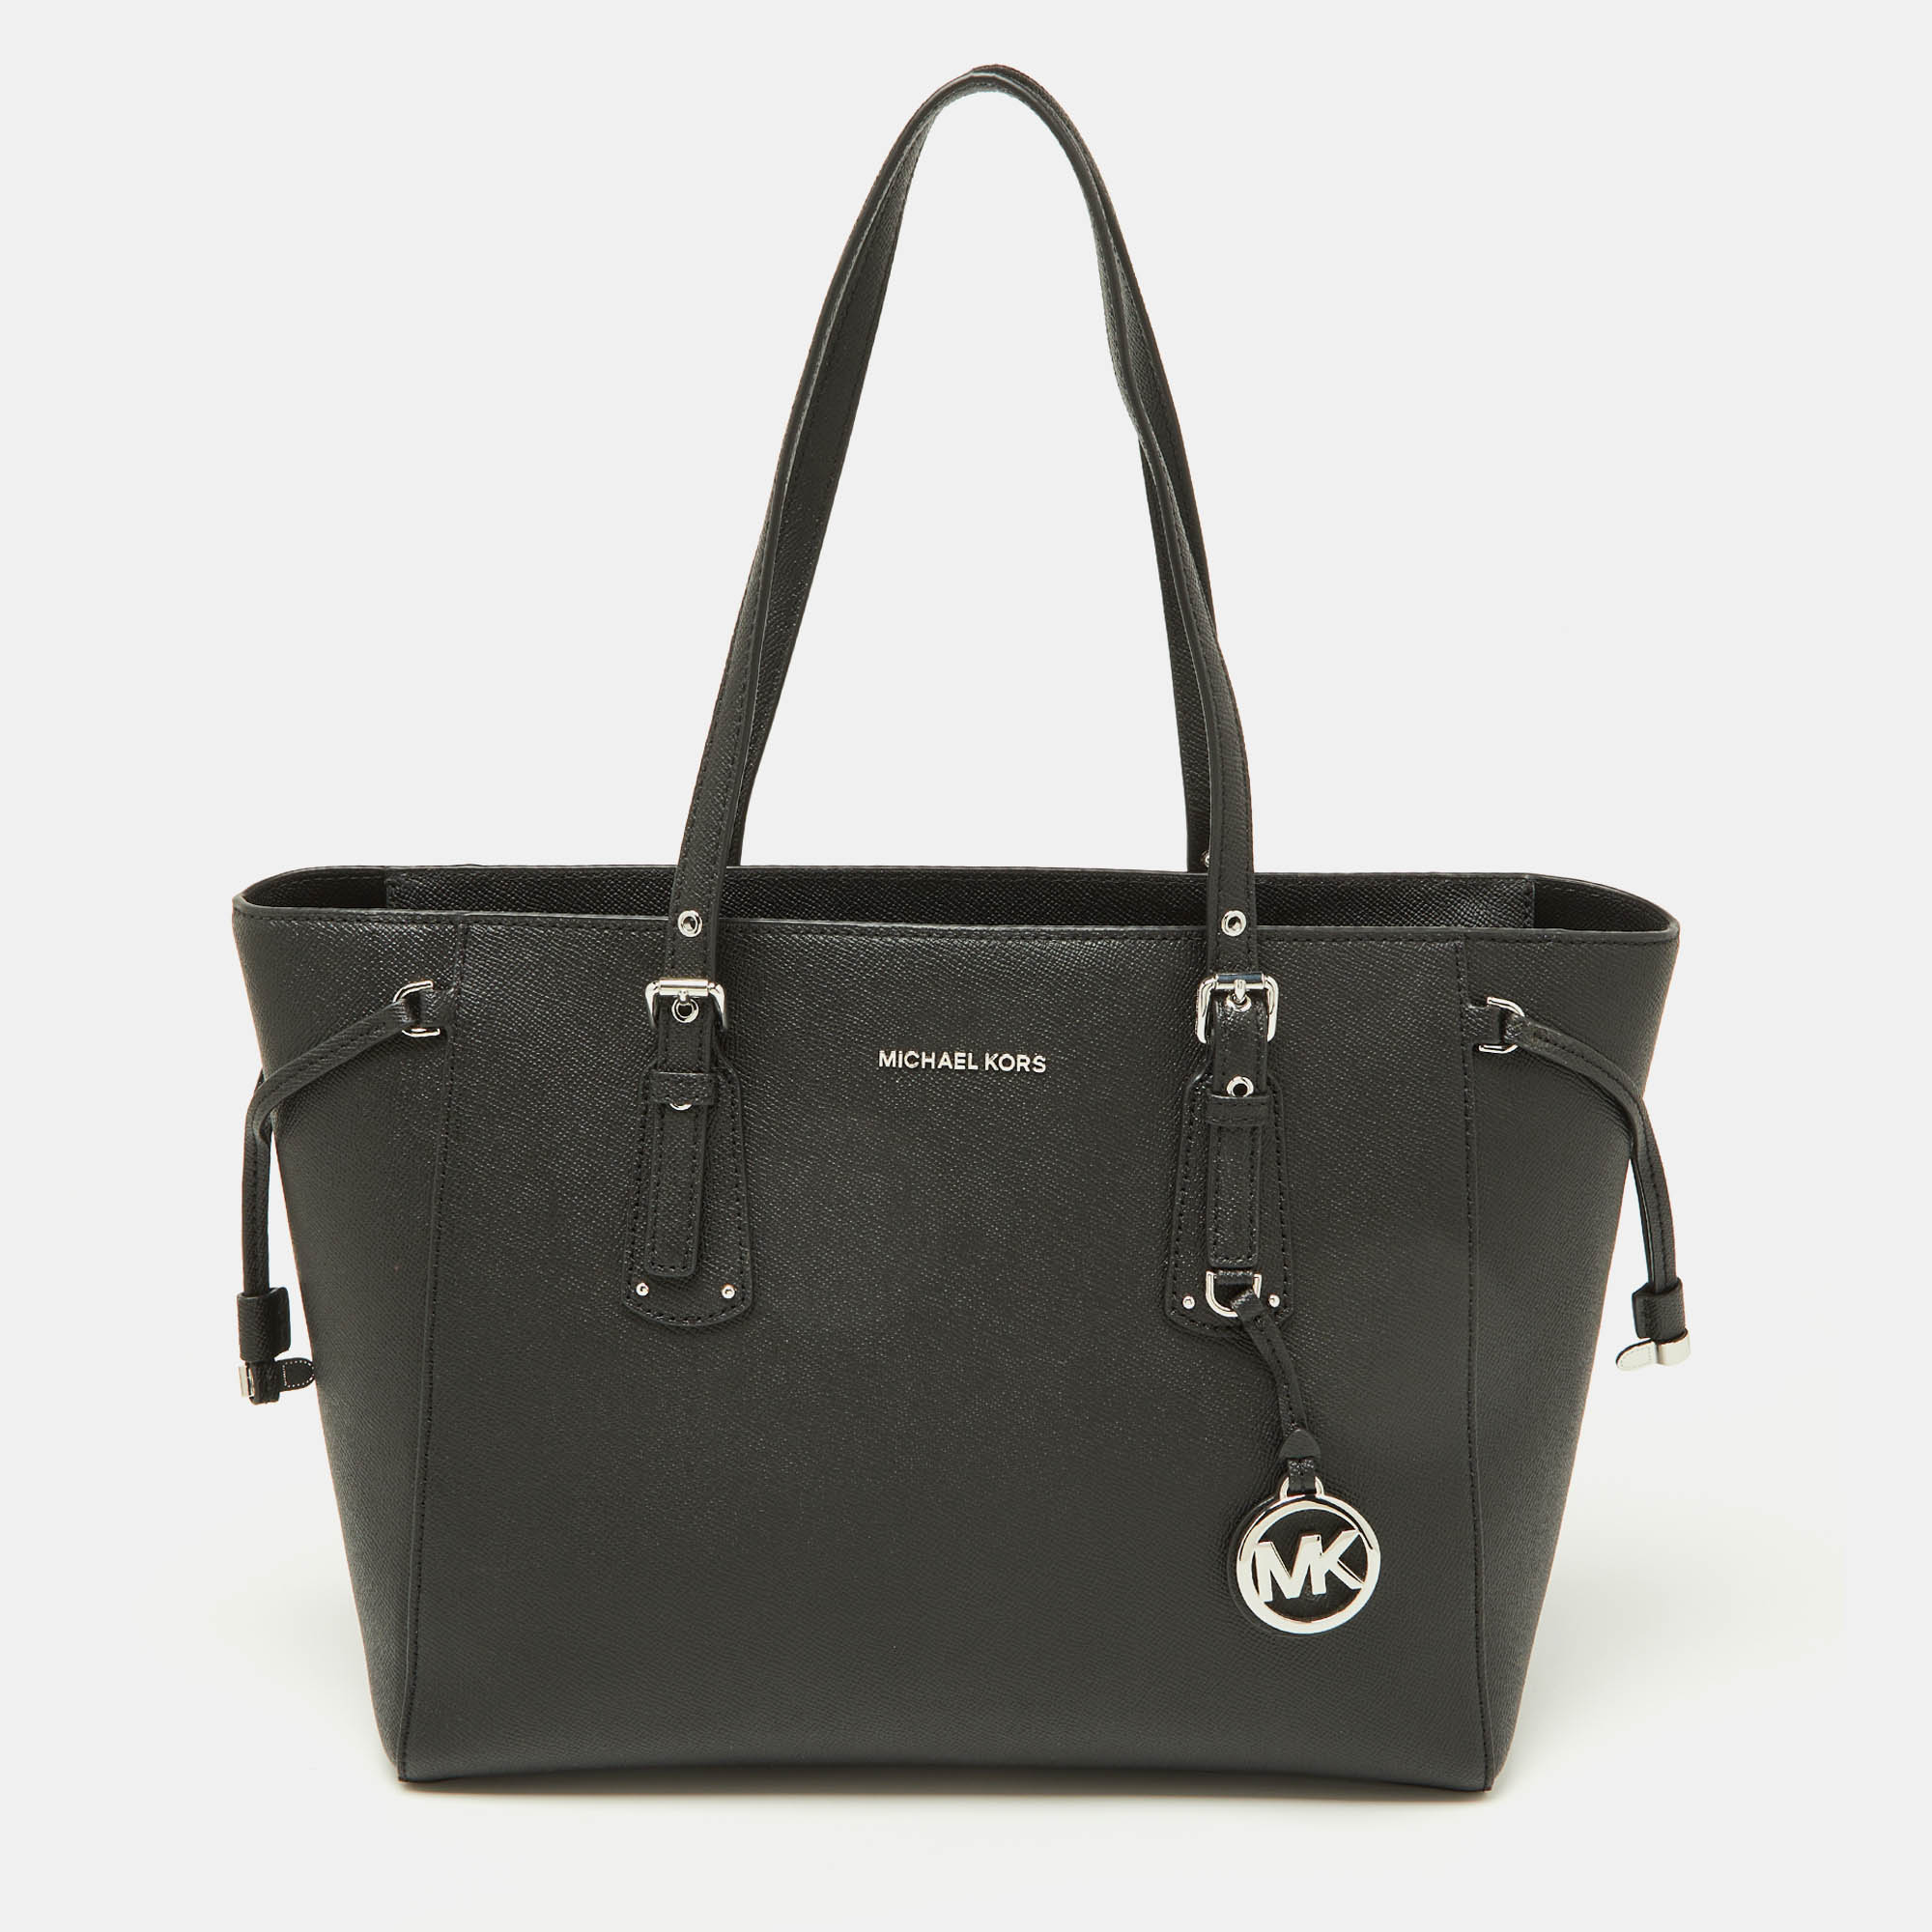 

Michael Kors Black Leather Voyager Tote